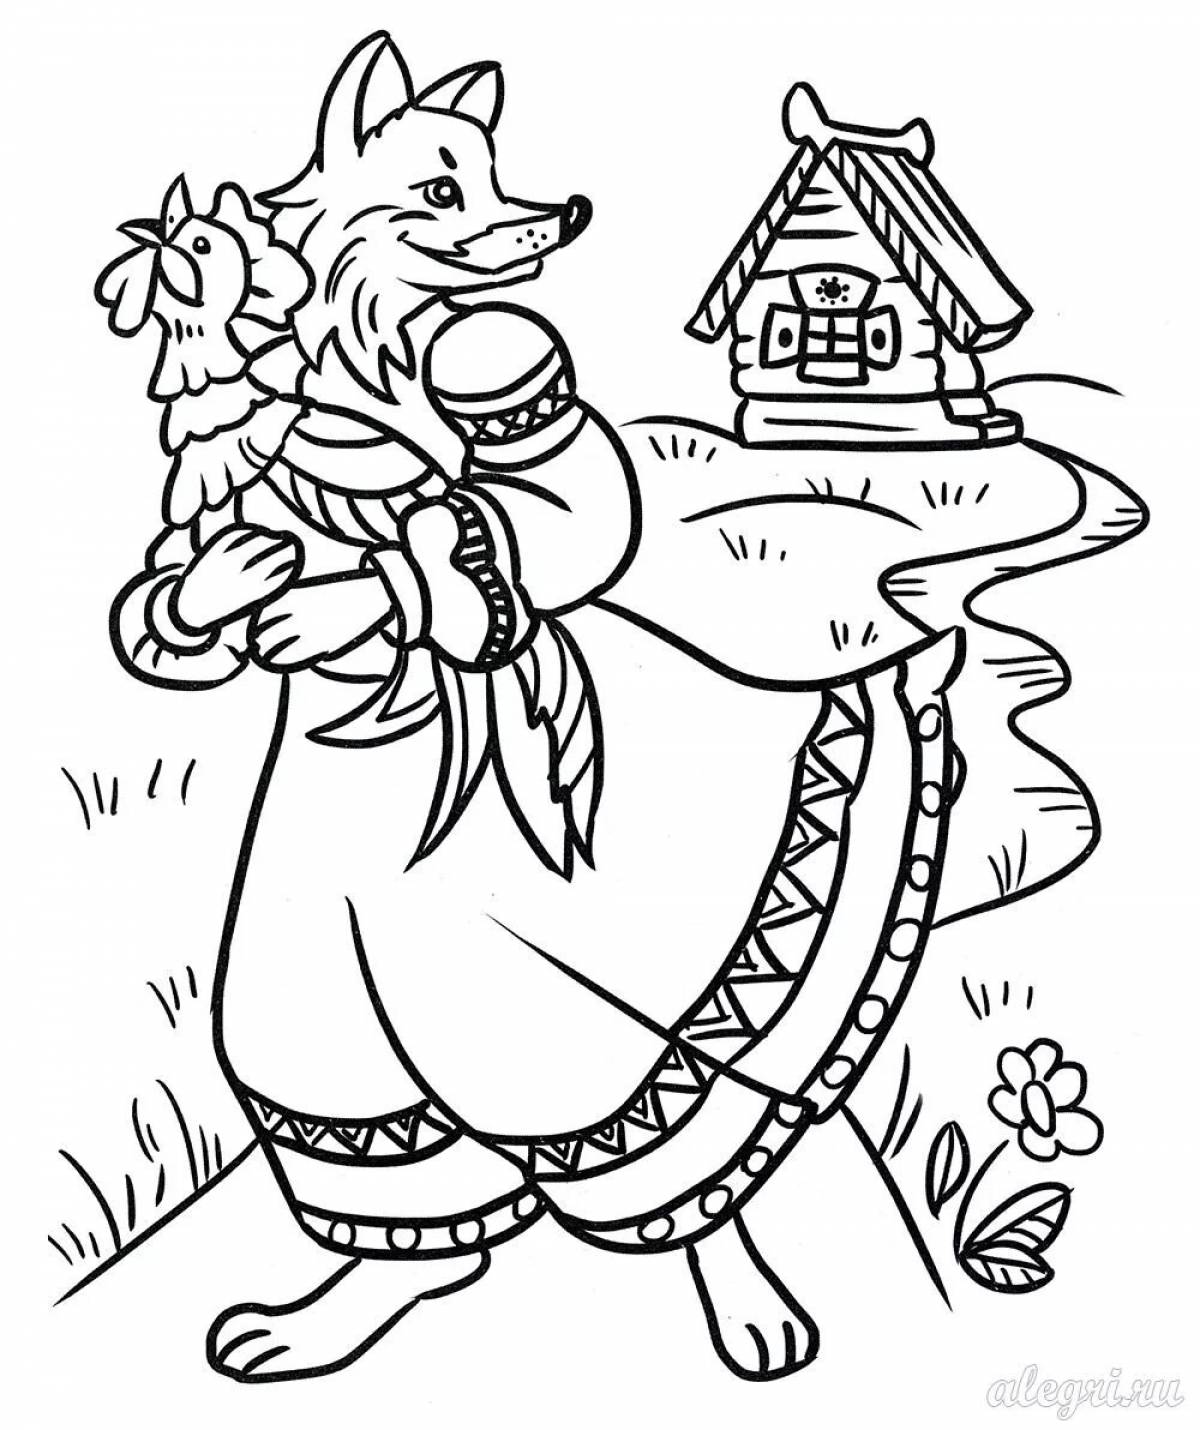 Friendly coloring fox and rooster russian folk tale